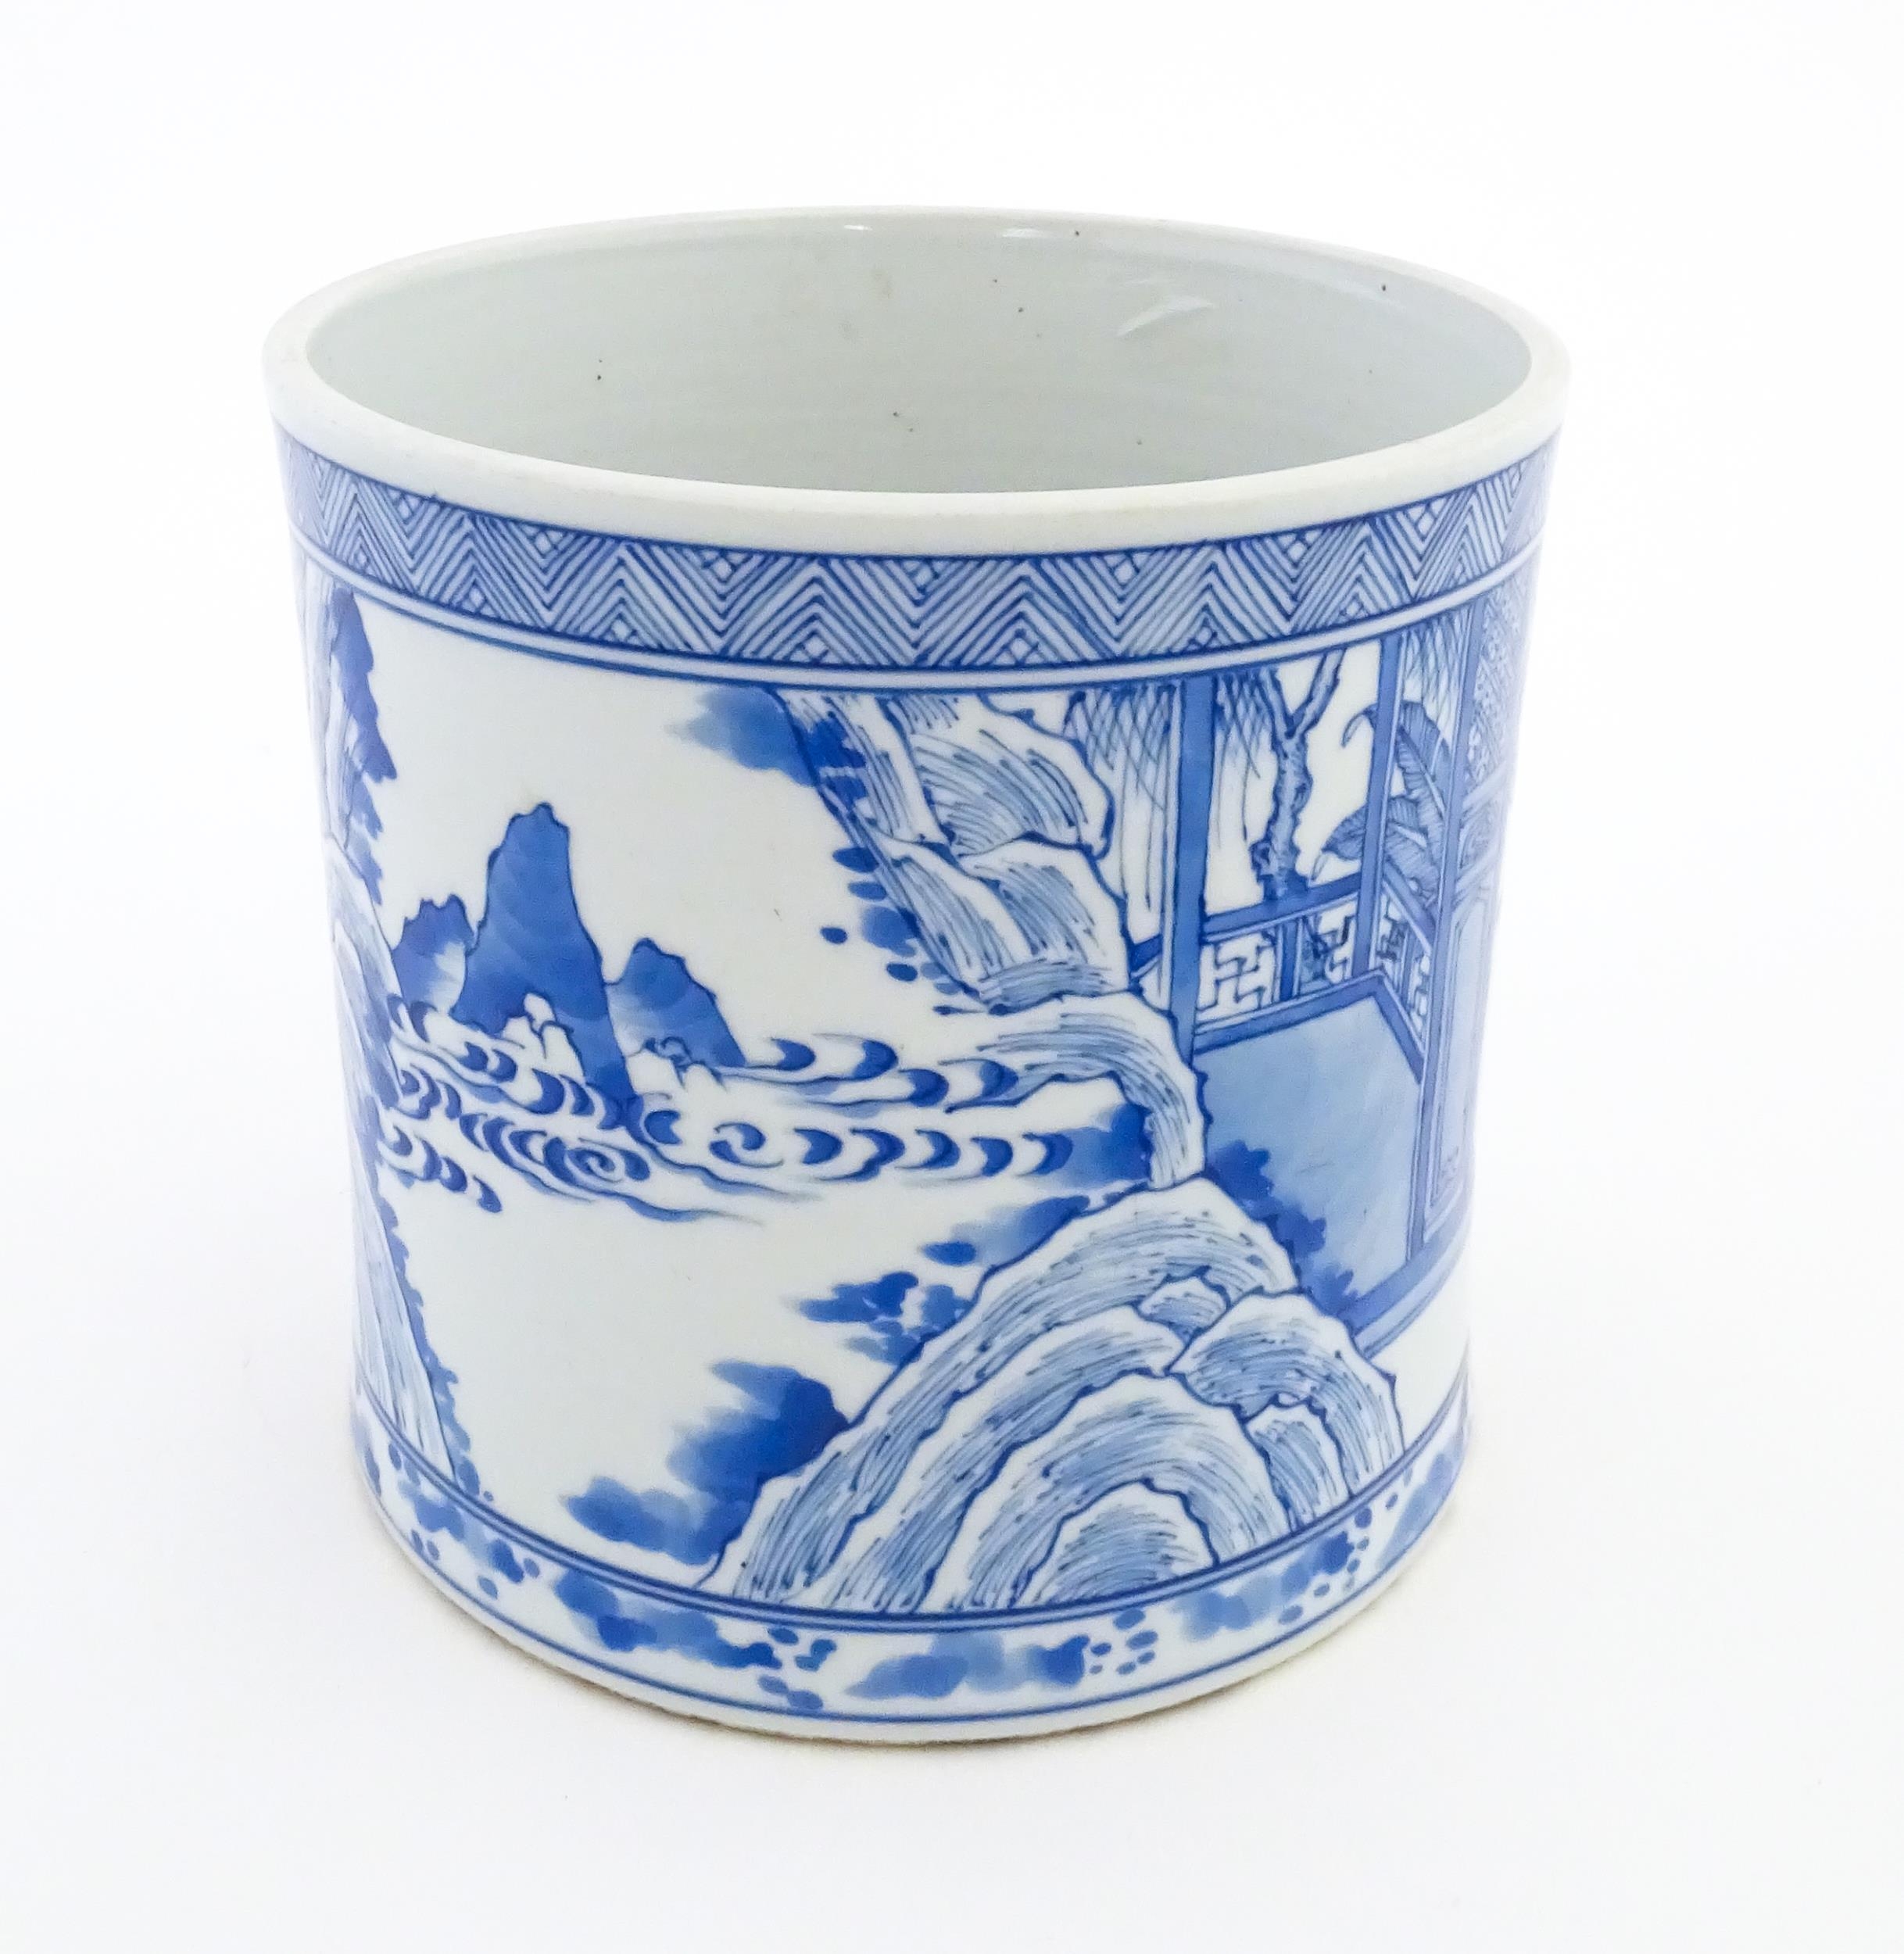 A Chinese blue and white vase / planter decorated with figures in a garden setting with a feast, and - Image 4 of 8